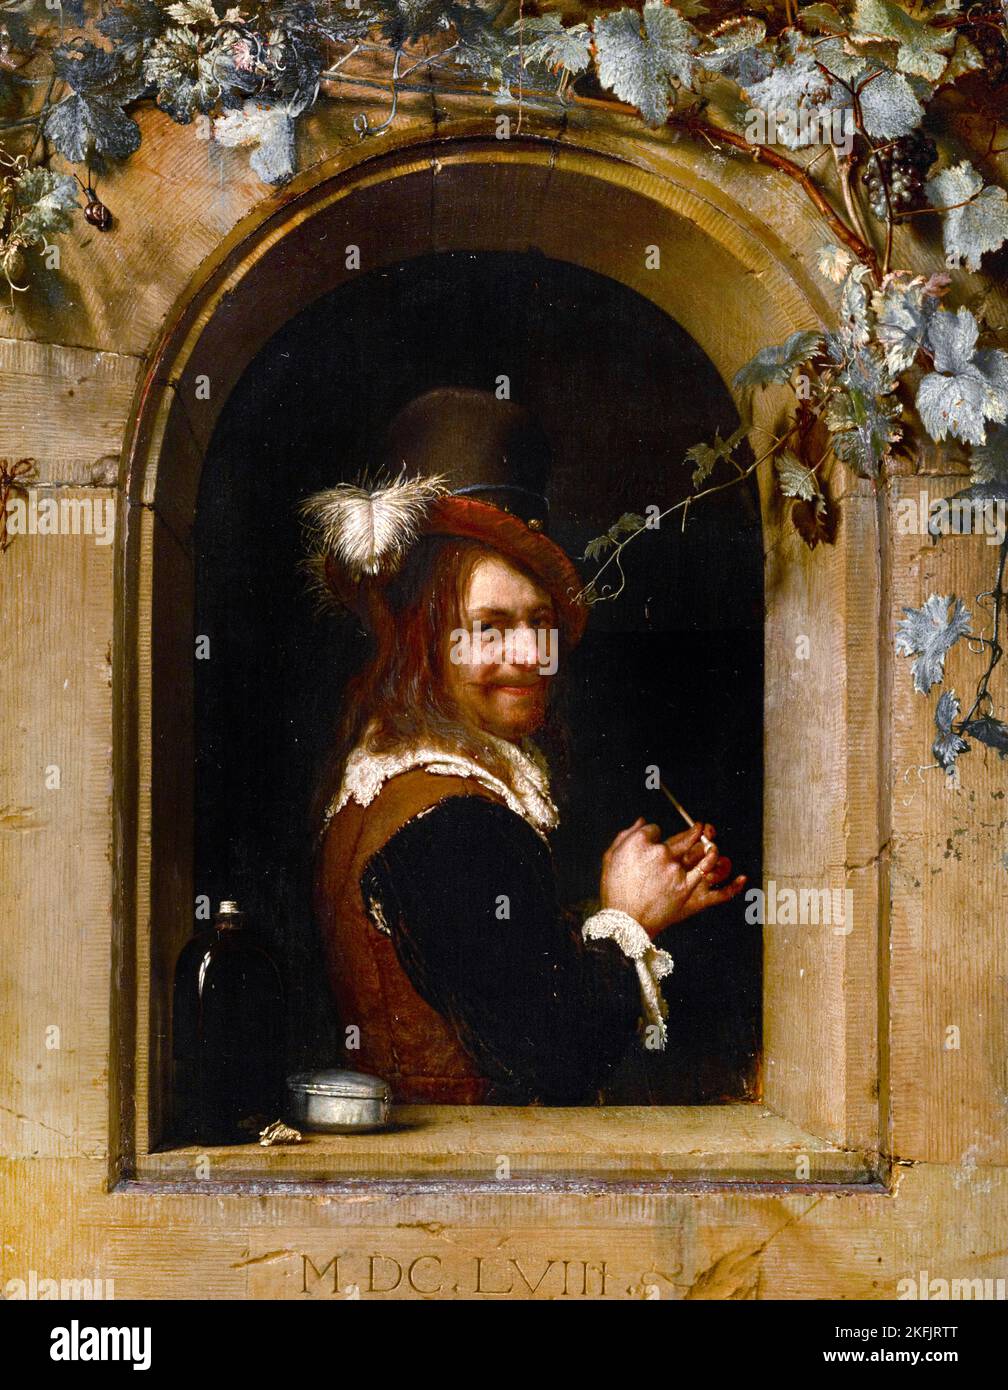 Frans van Mieris the Elder; Man with Pipe at the Window ; 1658; Oil on panel; Brukenthal National Museum, Sibiu, Romania. Stock Photo